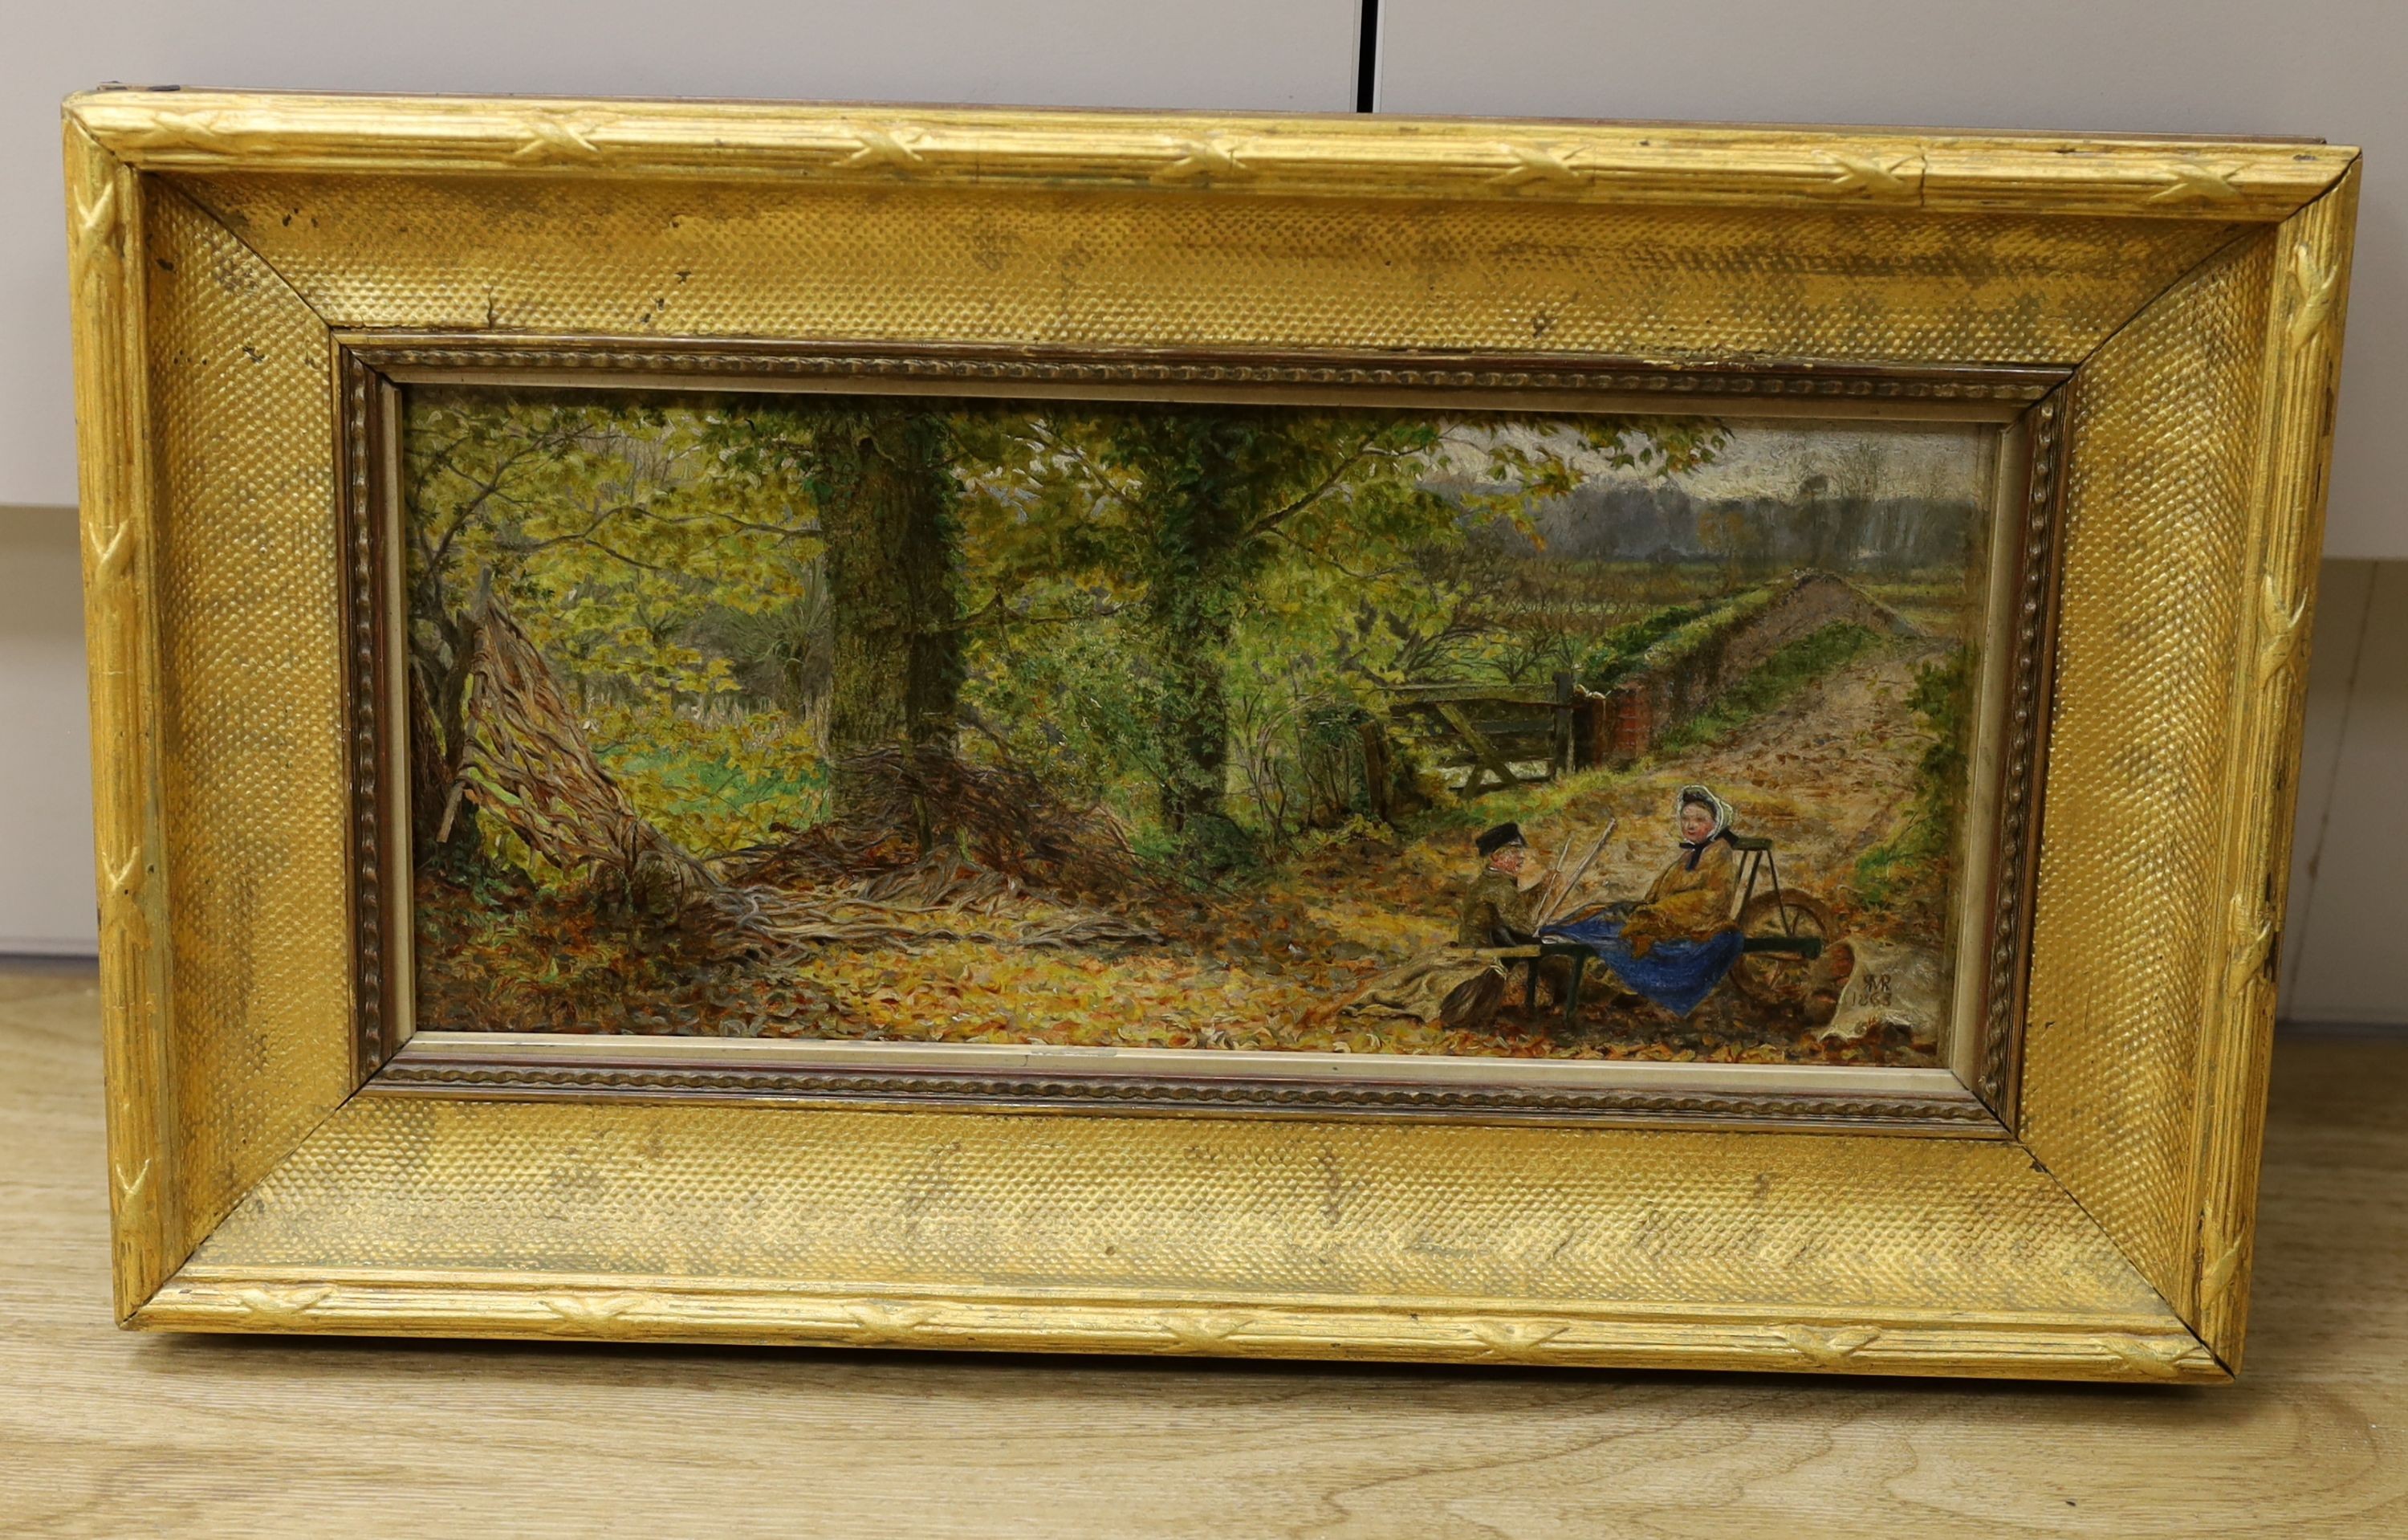 19th century British School, M.R.R., oil on canvas, Travellers seated in a landscape, initialled and dated 1863, ex. Peter Rose and Albert Gallichan Collection, Nov. 2021 Lot 155, 14 x 33cm